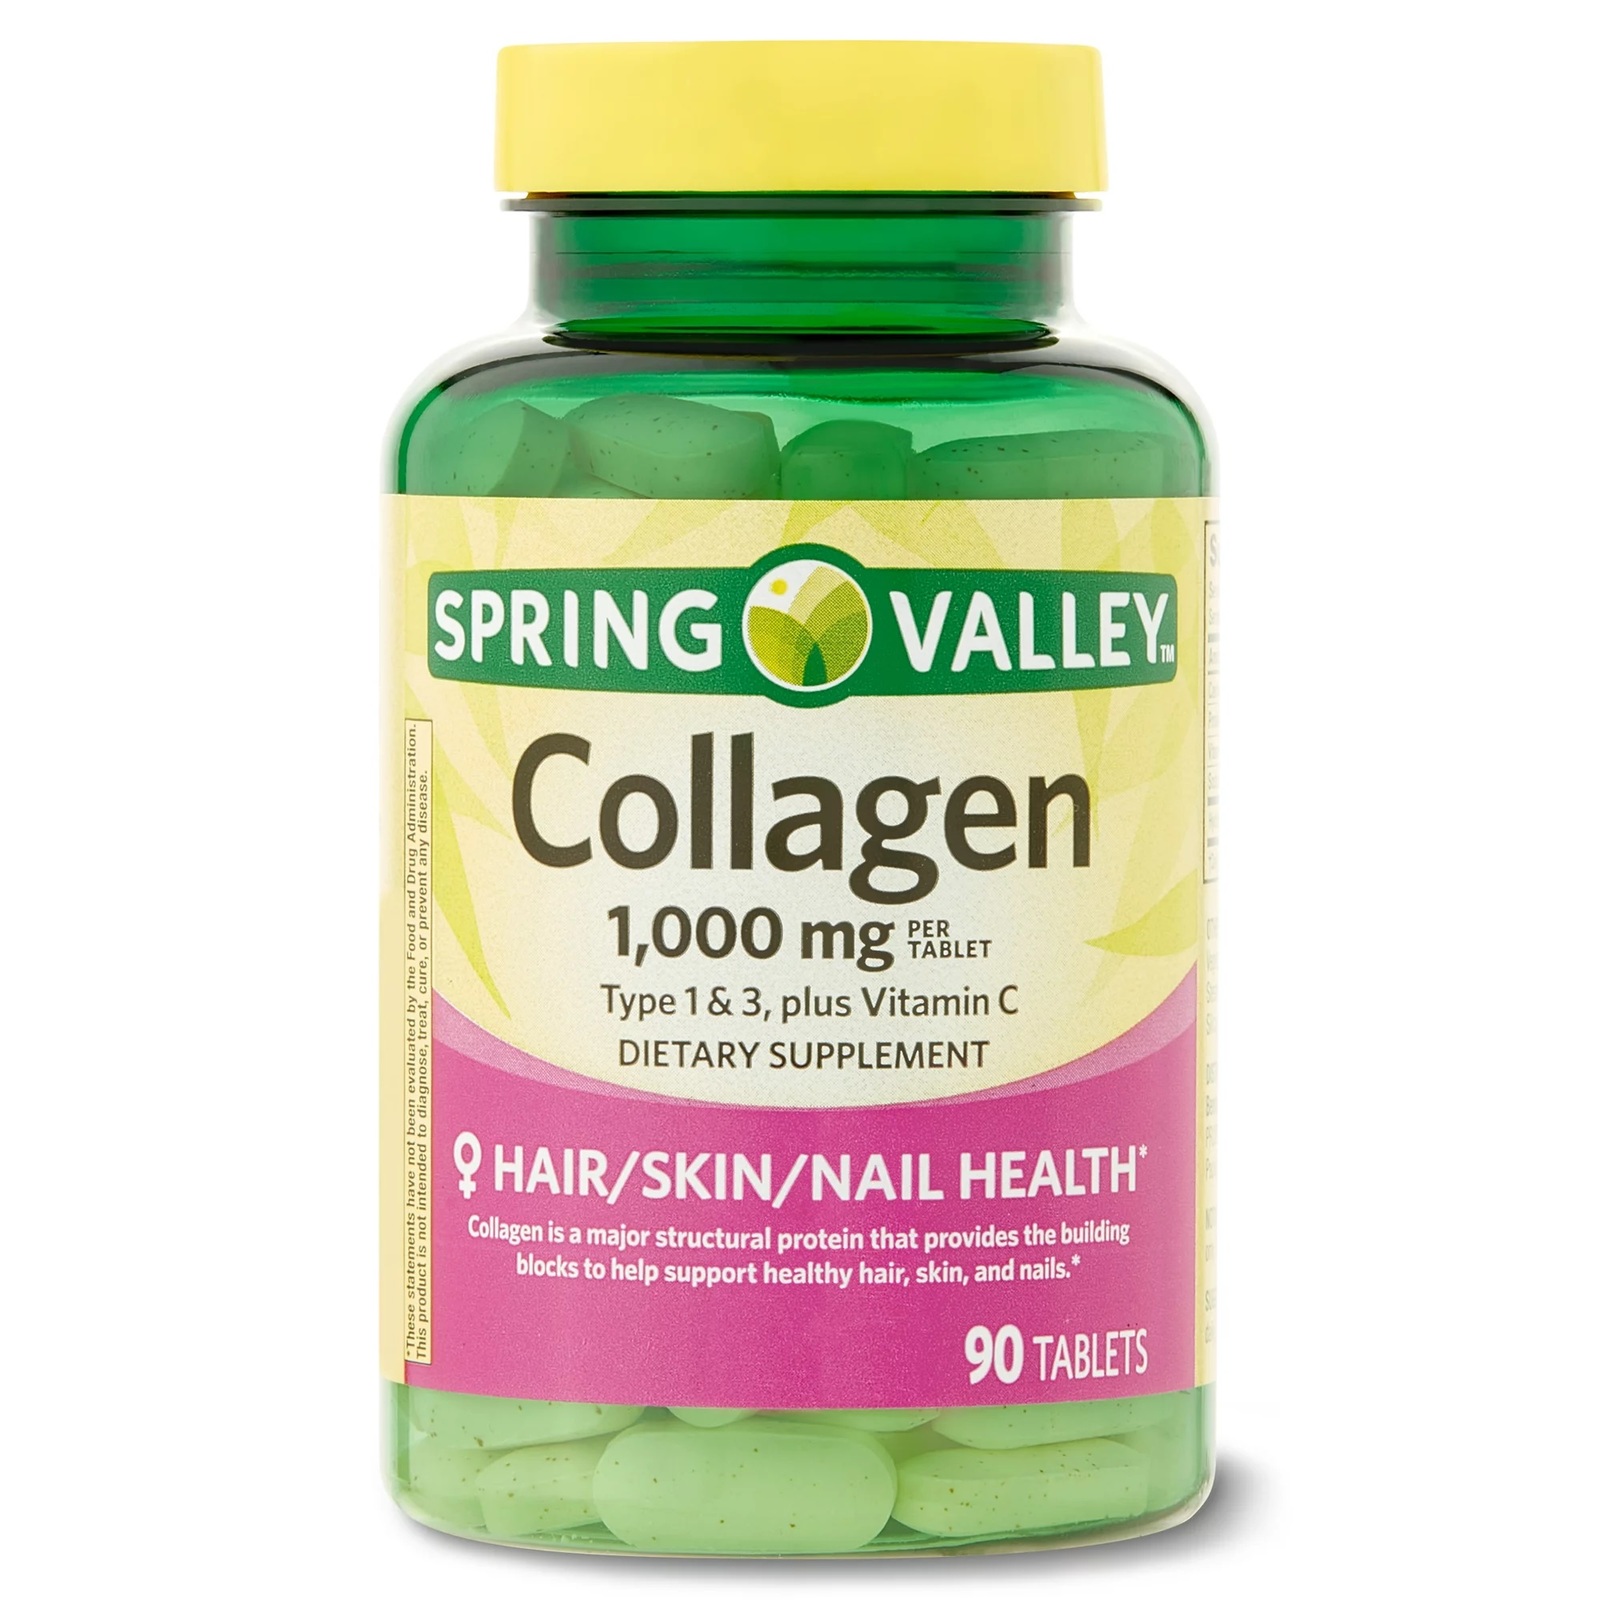 Spring Valley Collagen Type 1 & 3 Plus Vitamin C 1,000 mg 90 Tablets - $24.69